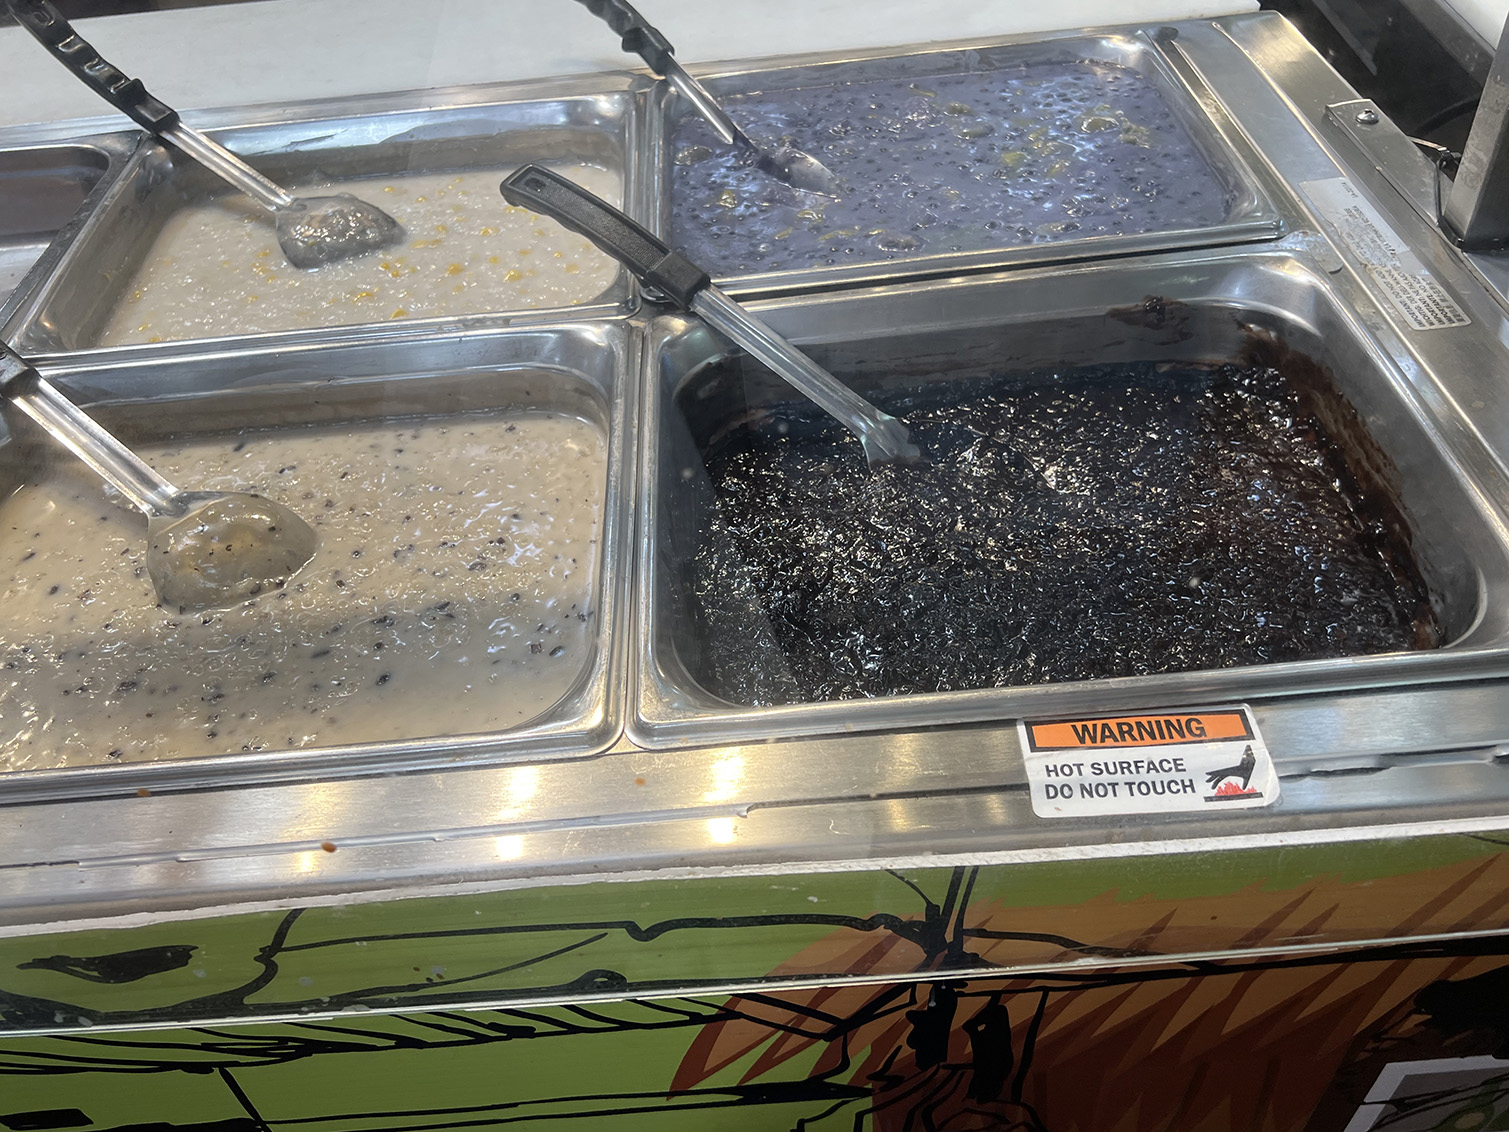 Desserts from Streetfood stall- Seafood City Supermarket in Irvine, California - Photo by Julie Nguyen